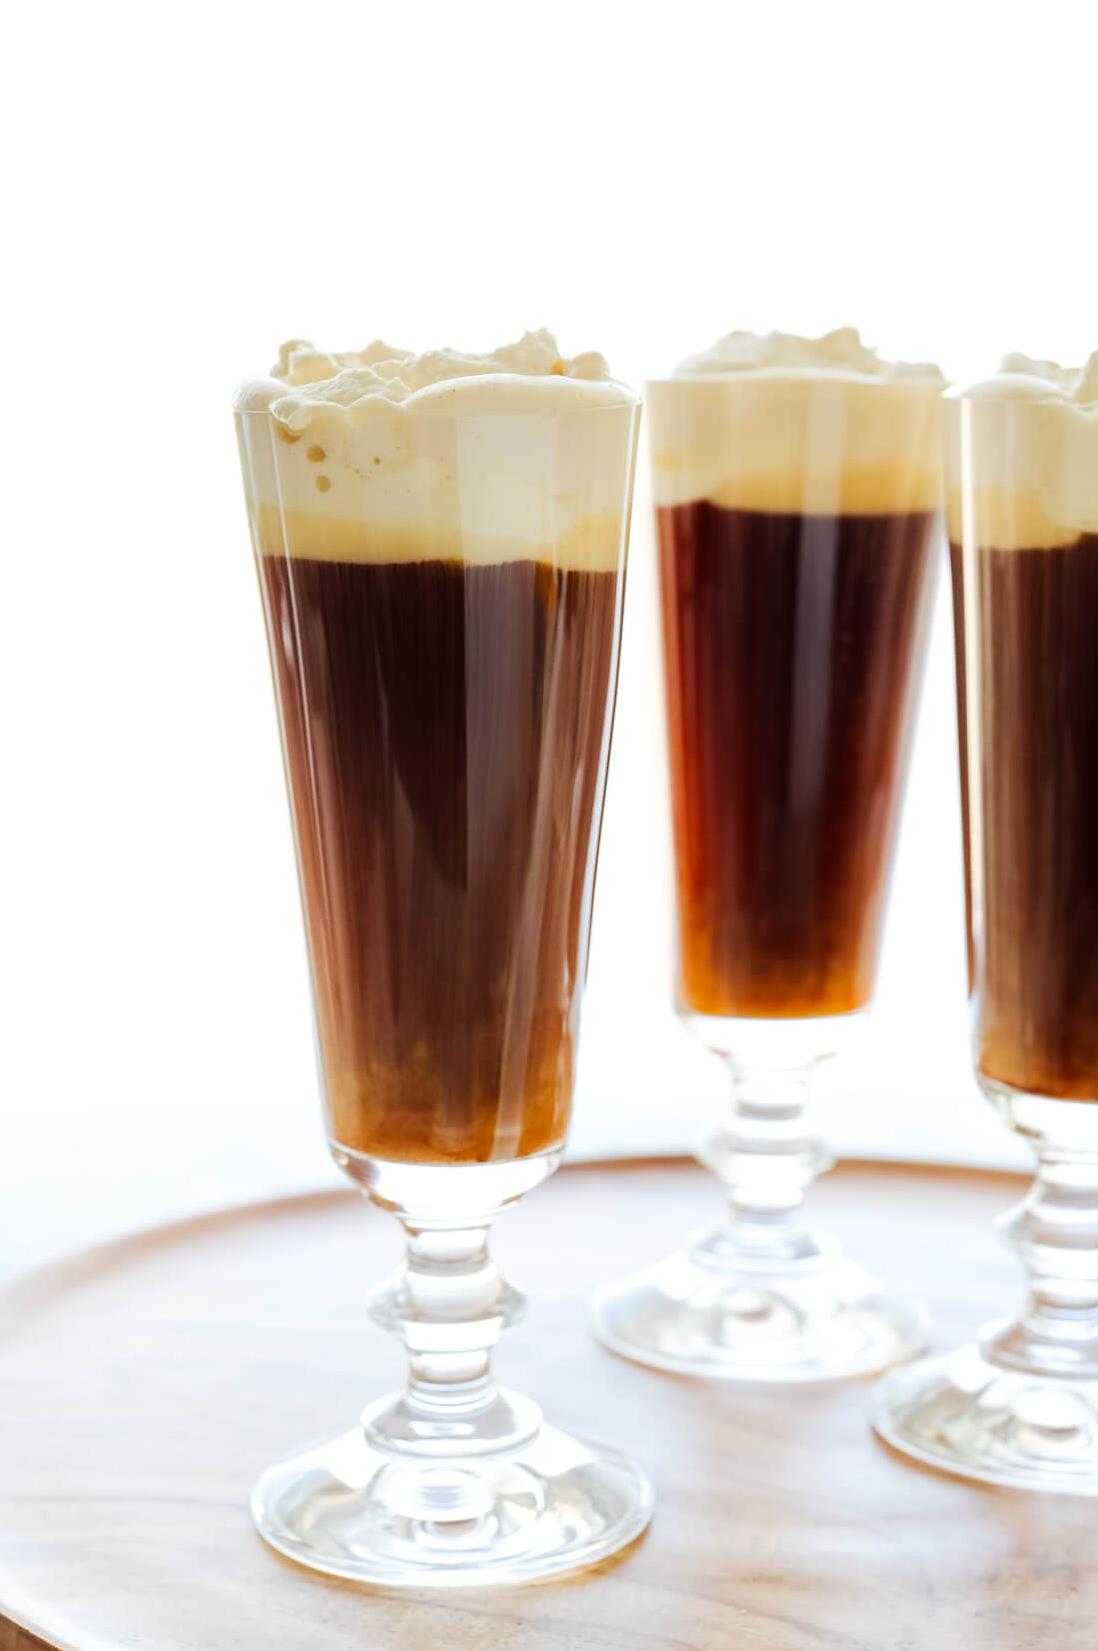  Pouring the cream over the back of a spoon is the key to achieving the classic look of an Irish Coffee.